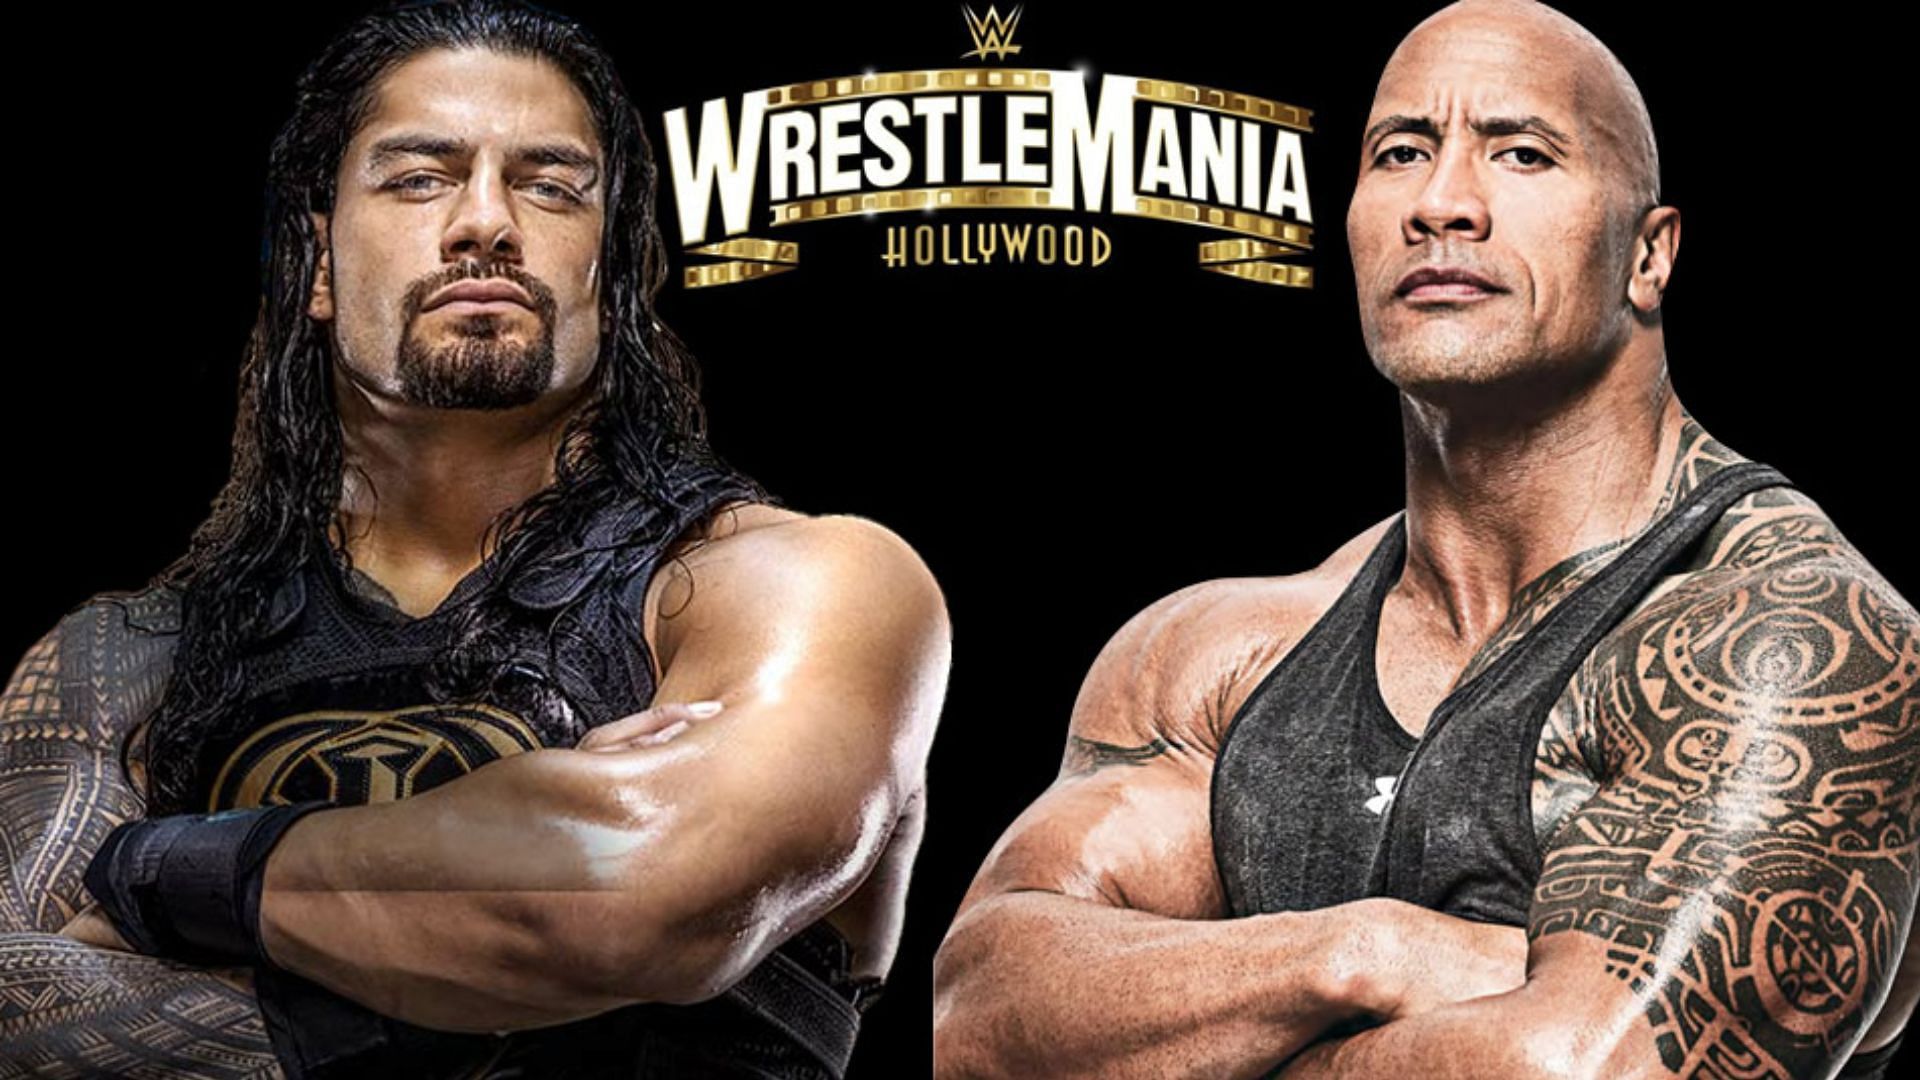 Roman Reigns vs. The Rock is rumored for next year